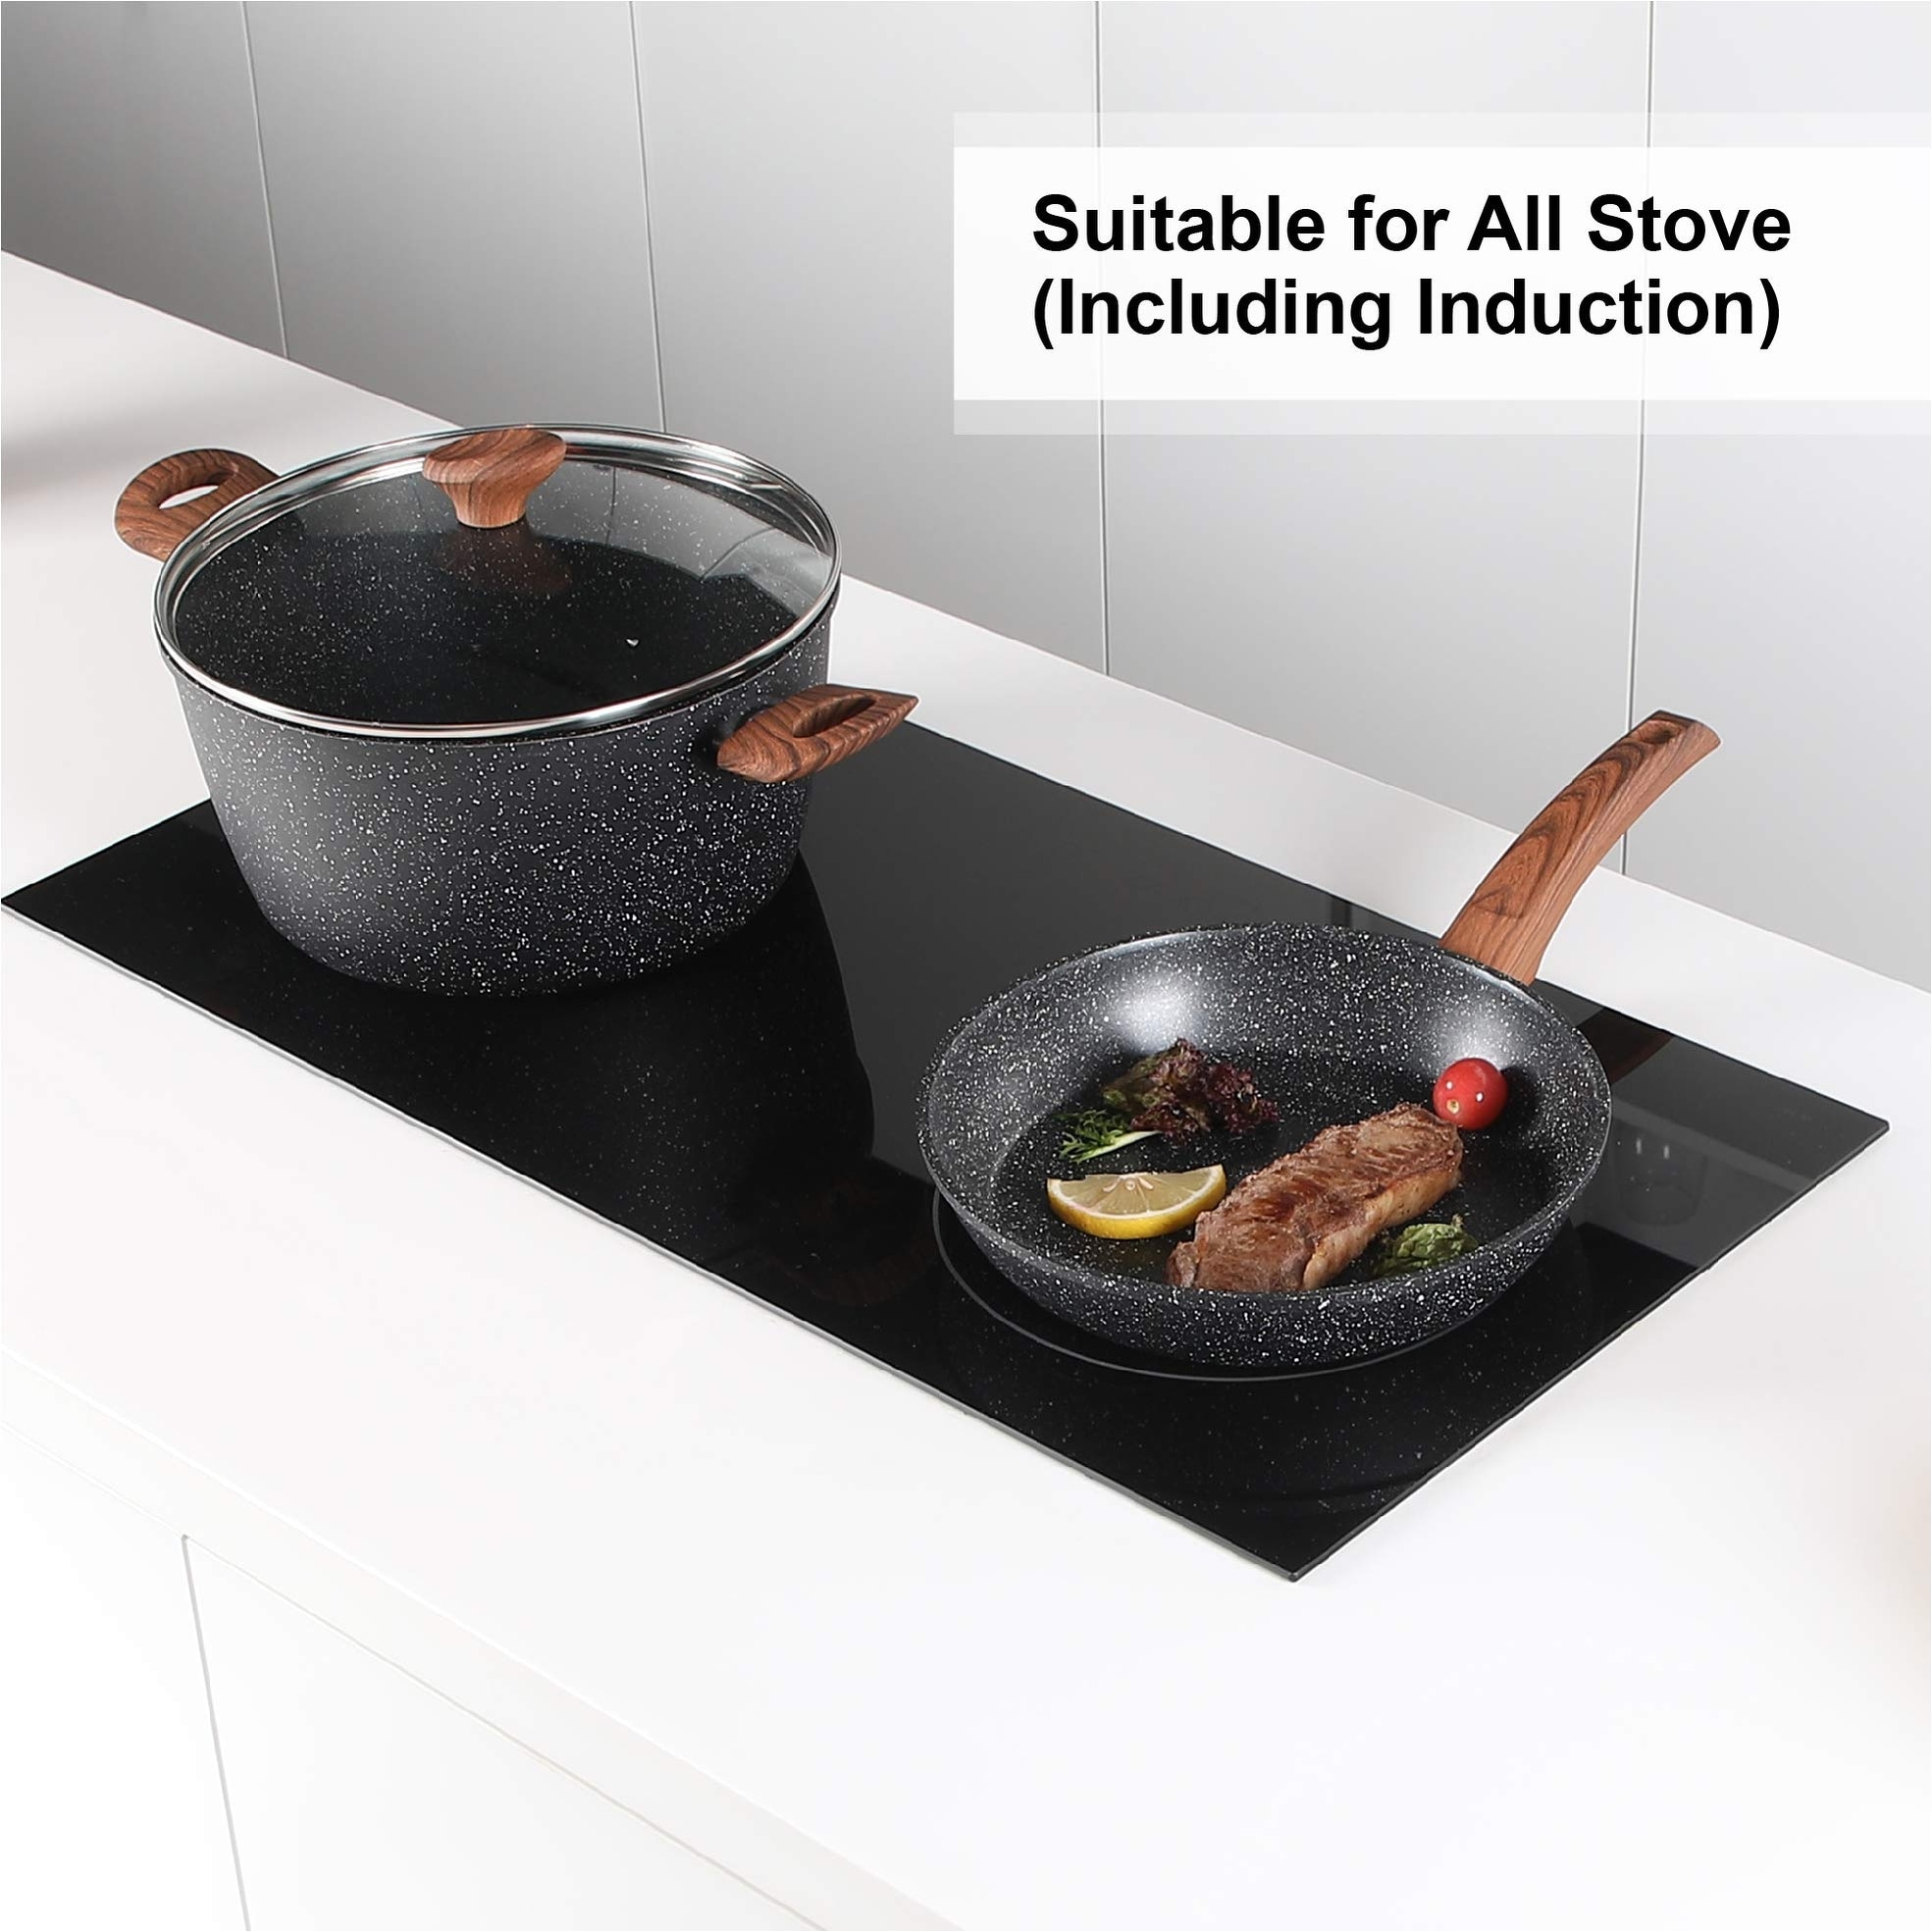 Stylish Hammered Finish Nonstick 15 Pieces Cookware Gift Set-Kitchen Academy